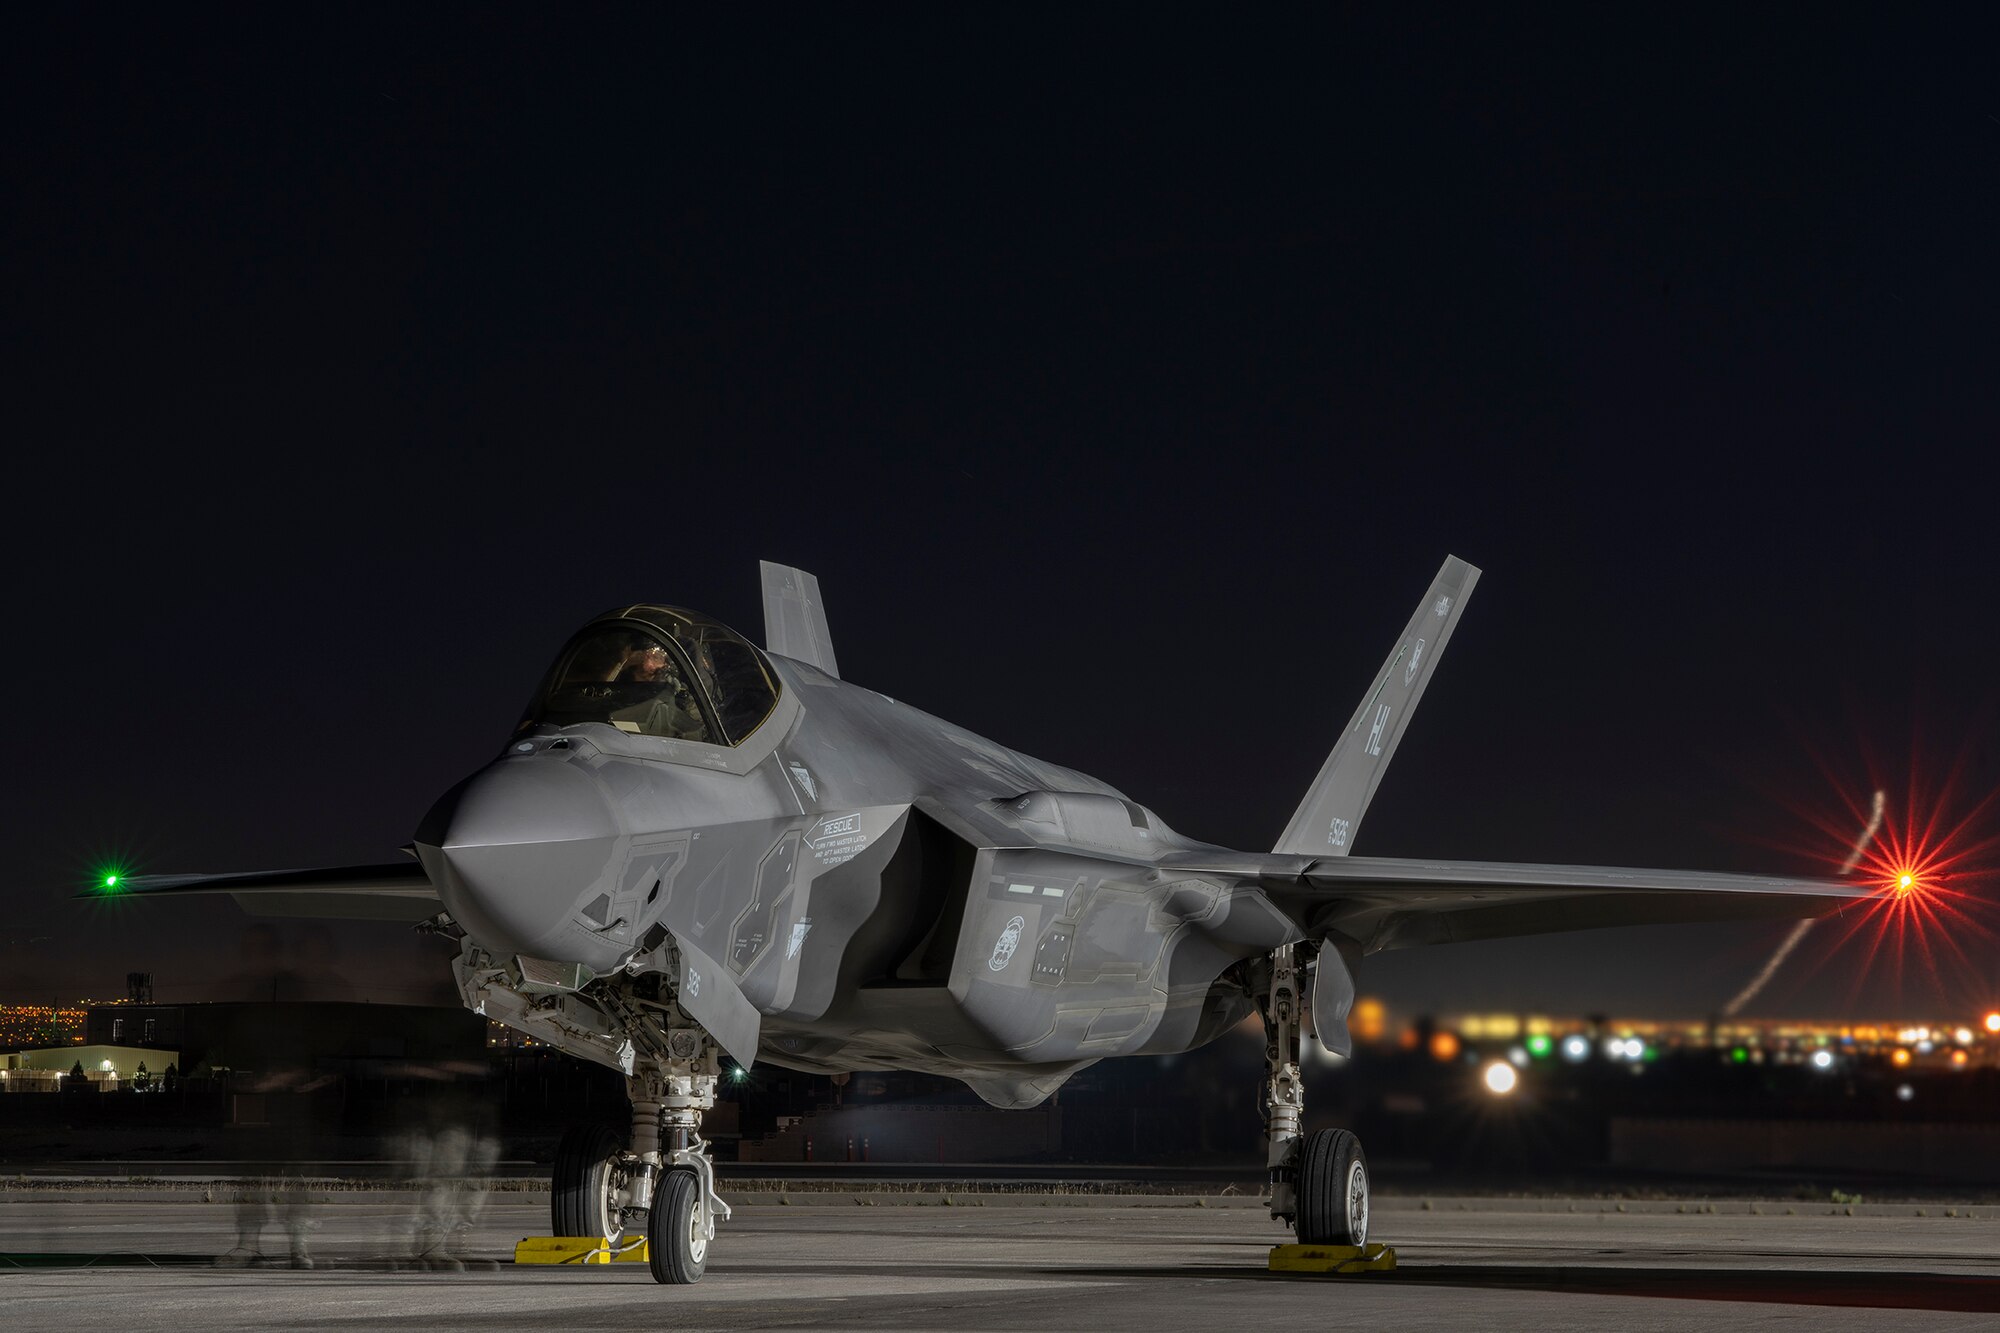 An F-35A Lightning II fighter jet prepares for take-off at night.